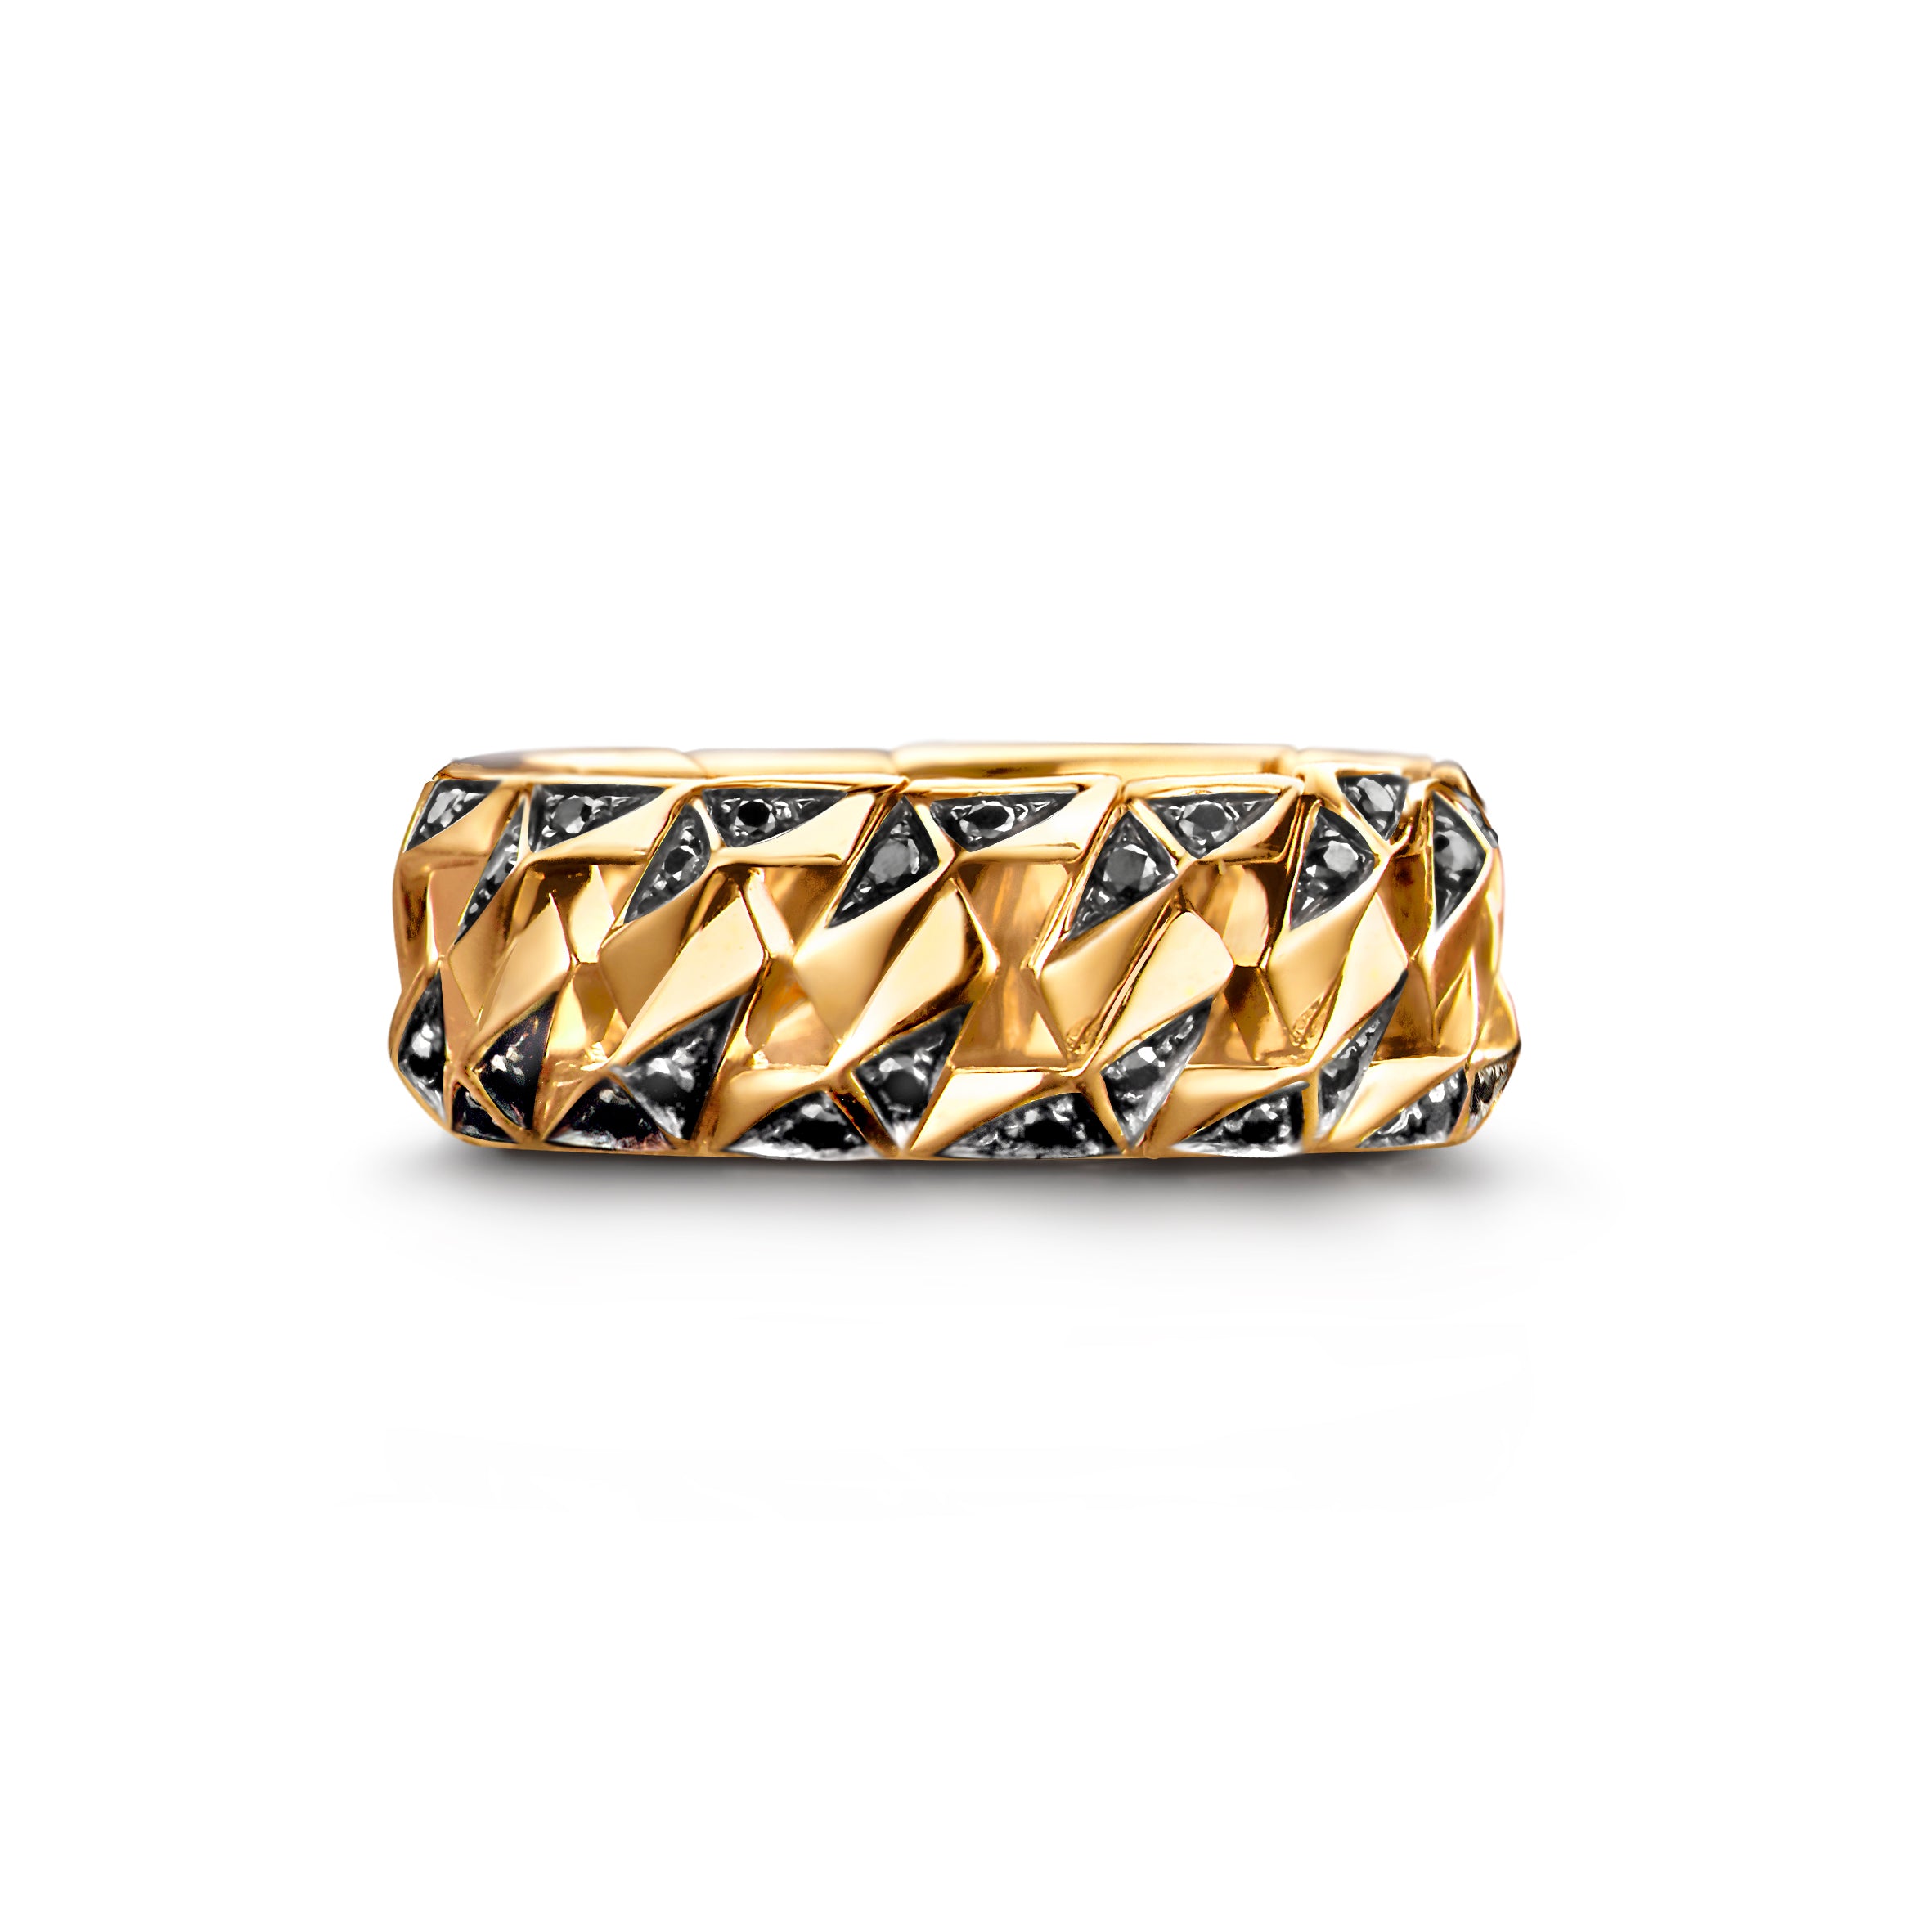 BOND SIGNATURE RING IN YELLOW GOLD WITH BLACK DIAMONDS